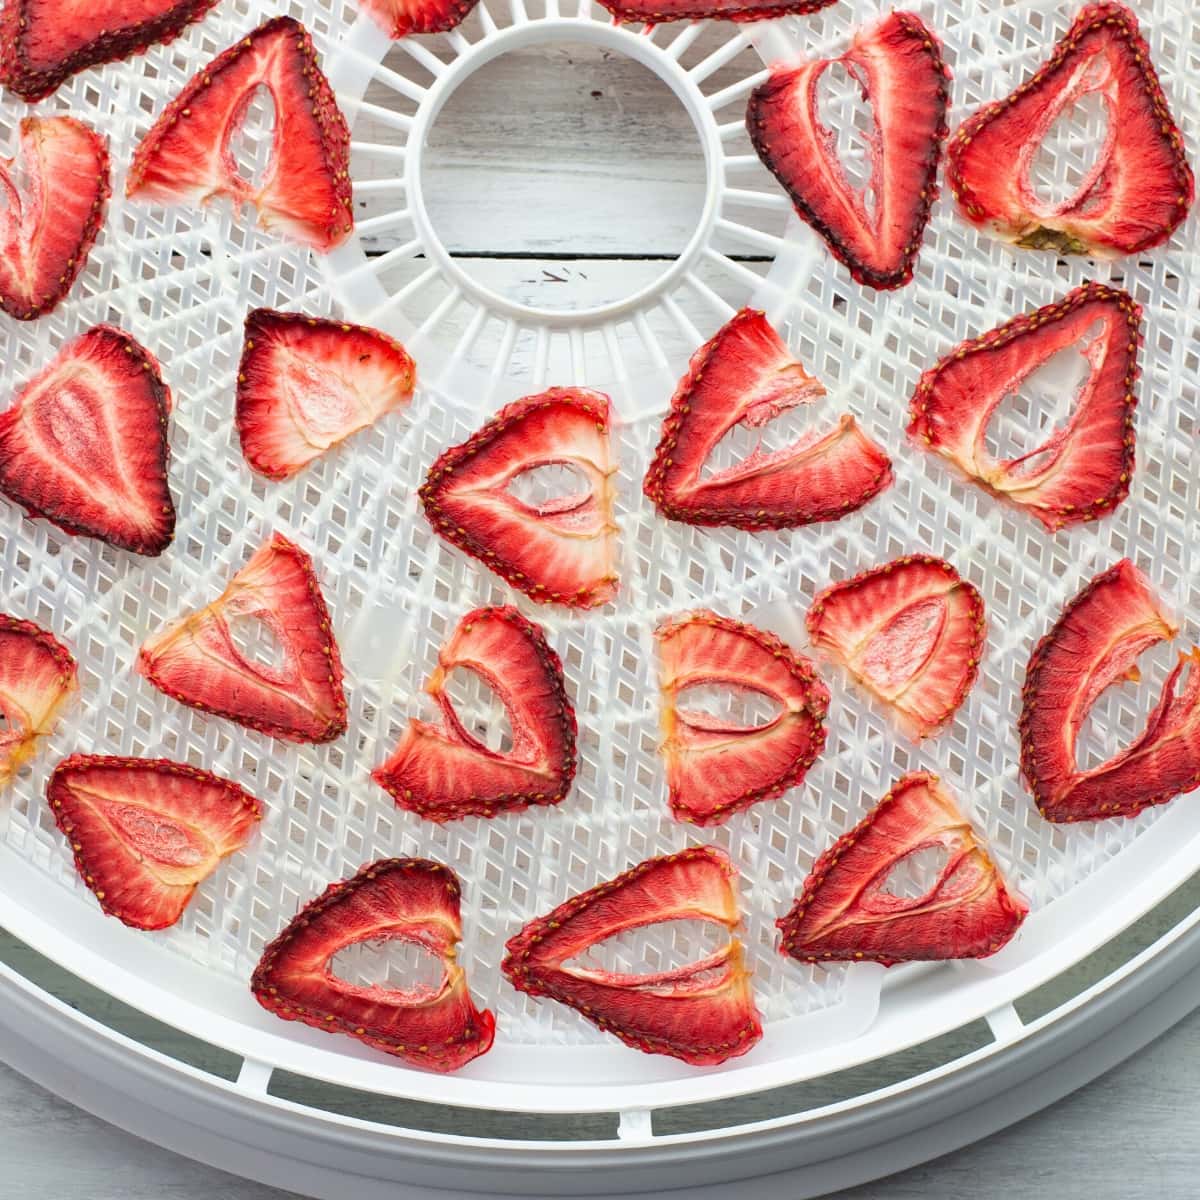 How To Dehydrate Strawberries Flour On My Face,How To Store Basil Leaves In Fridge